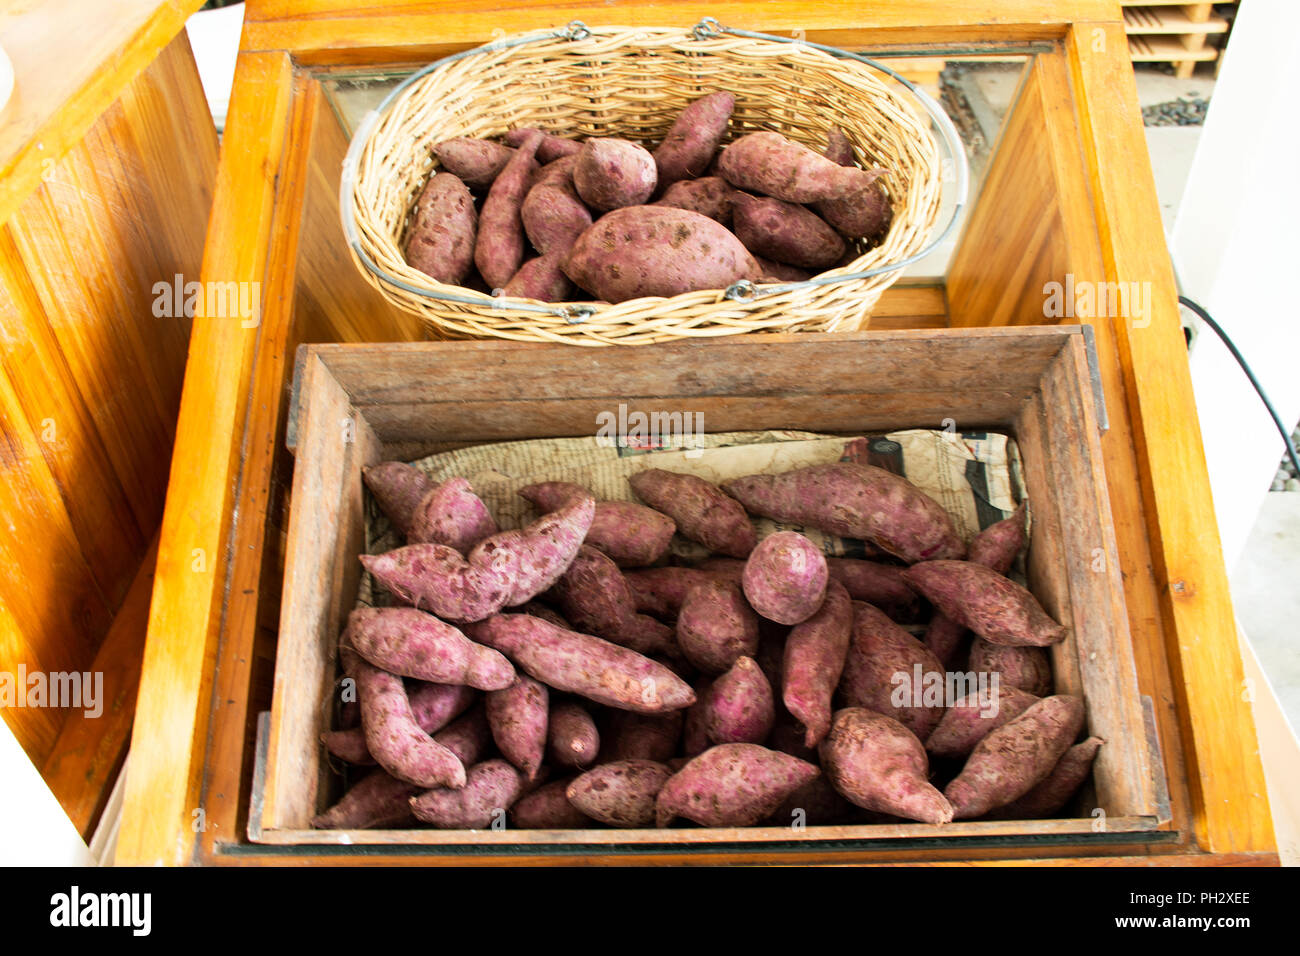 Purple yam tuber or violet sweet potato for sale at greengrocer and vegetable shop Stock Photo